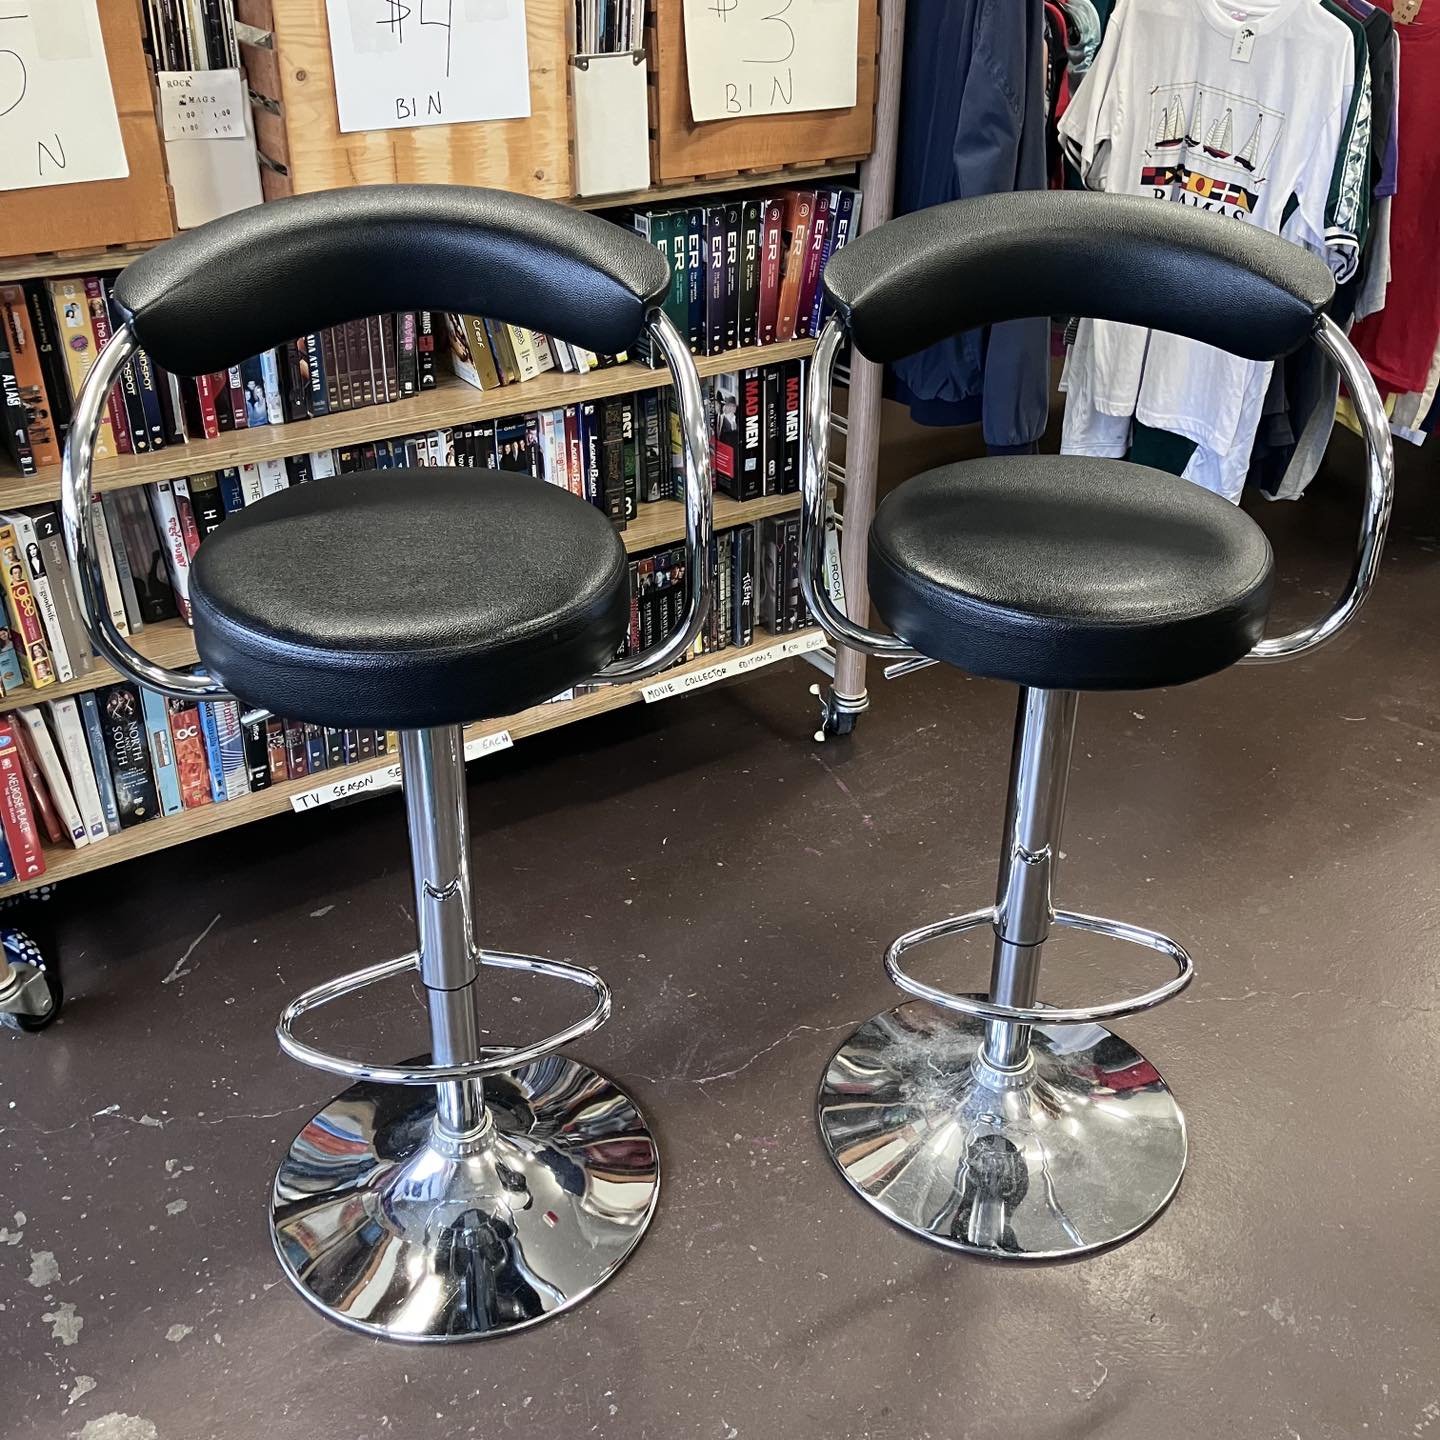 Pair of Chrome Barstools

Nice condition. Rise and Lower functions work as intended.

$50 for the pair 

🌲

#secondhand #thrift #thriftshopfinds #thriftshop #thriftstore #shoplocal #niagarafalls #ShopSmall